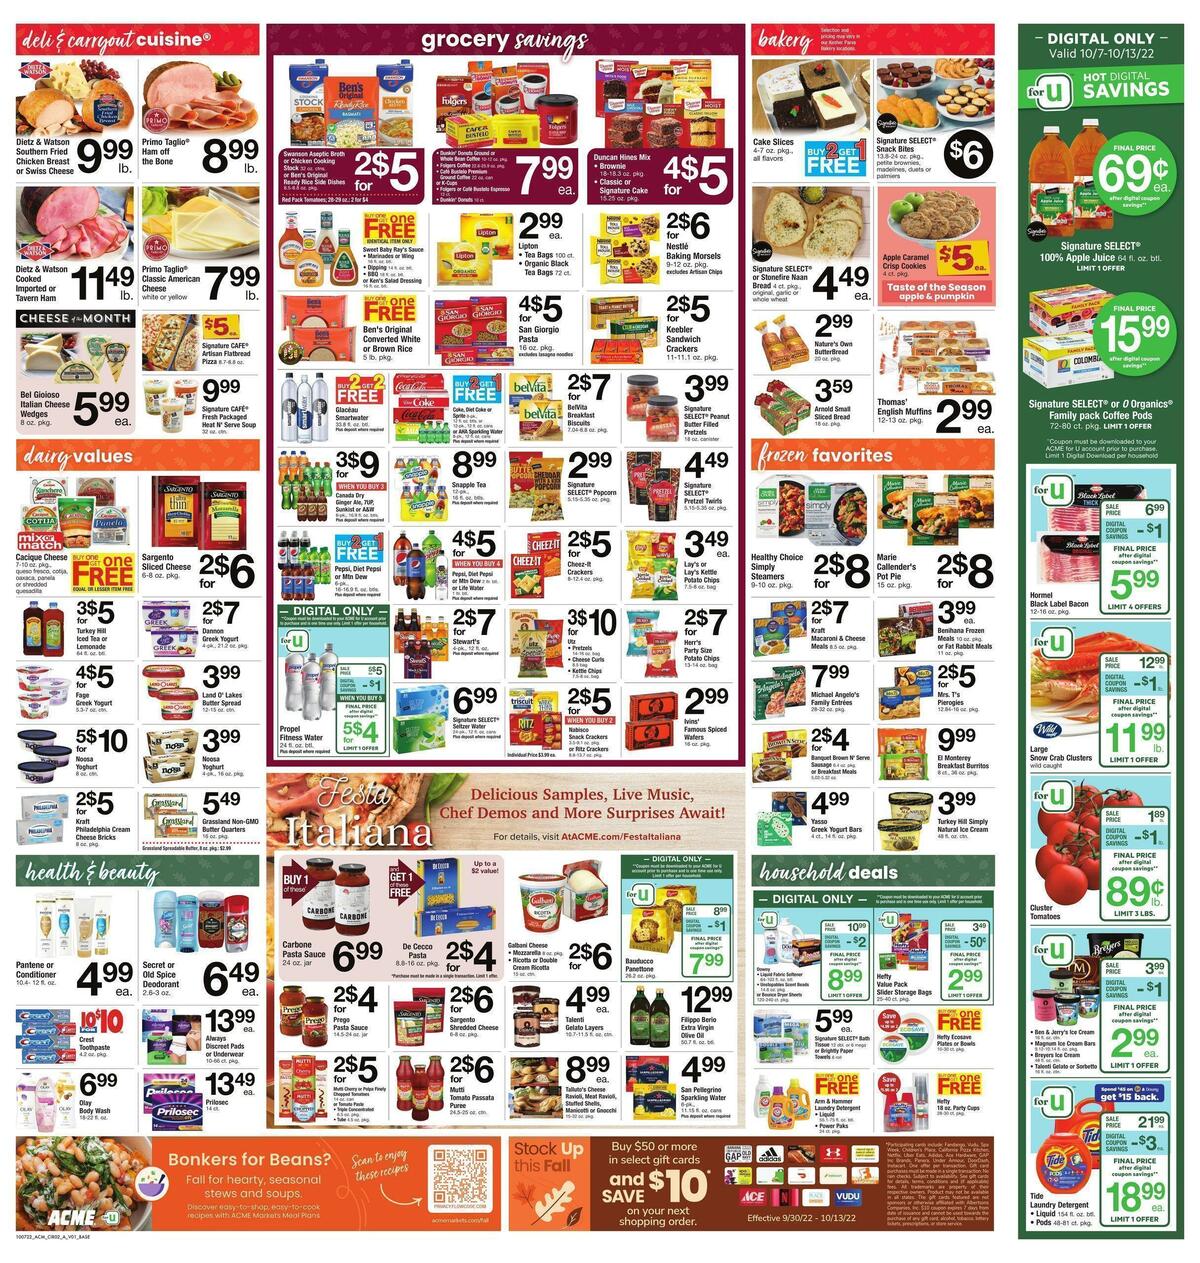 ACME Markets Weekly Ad from October 7